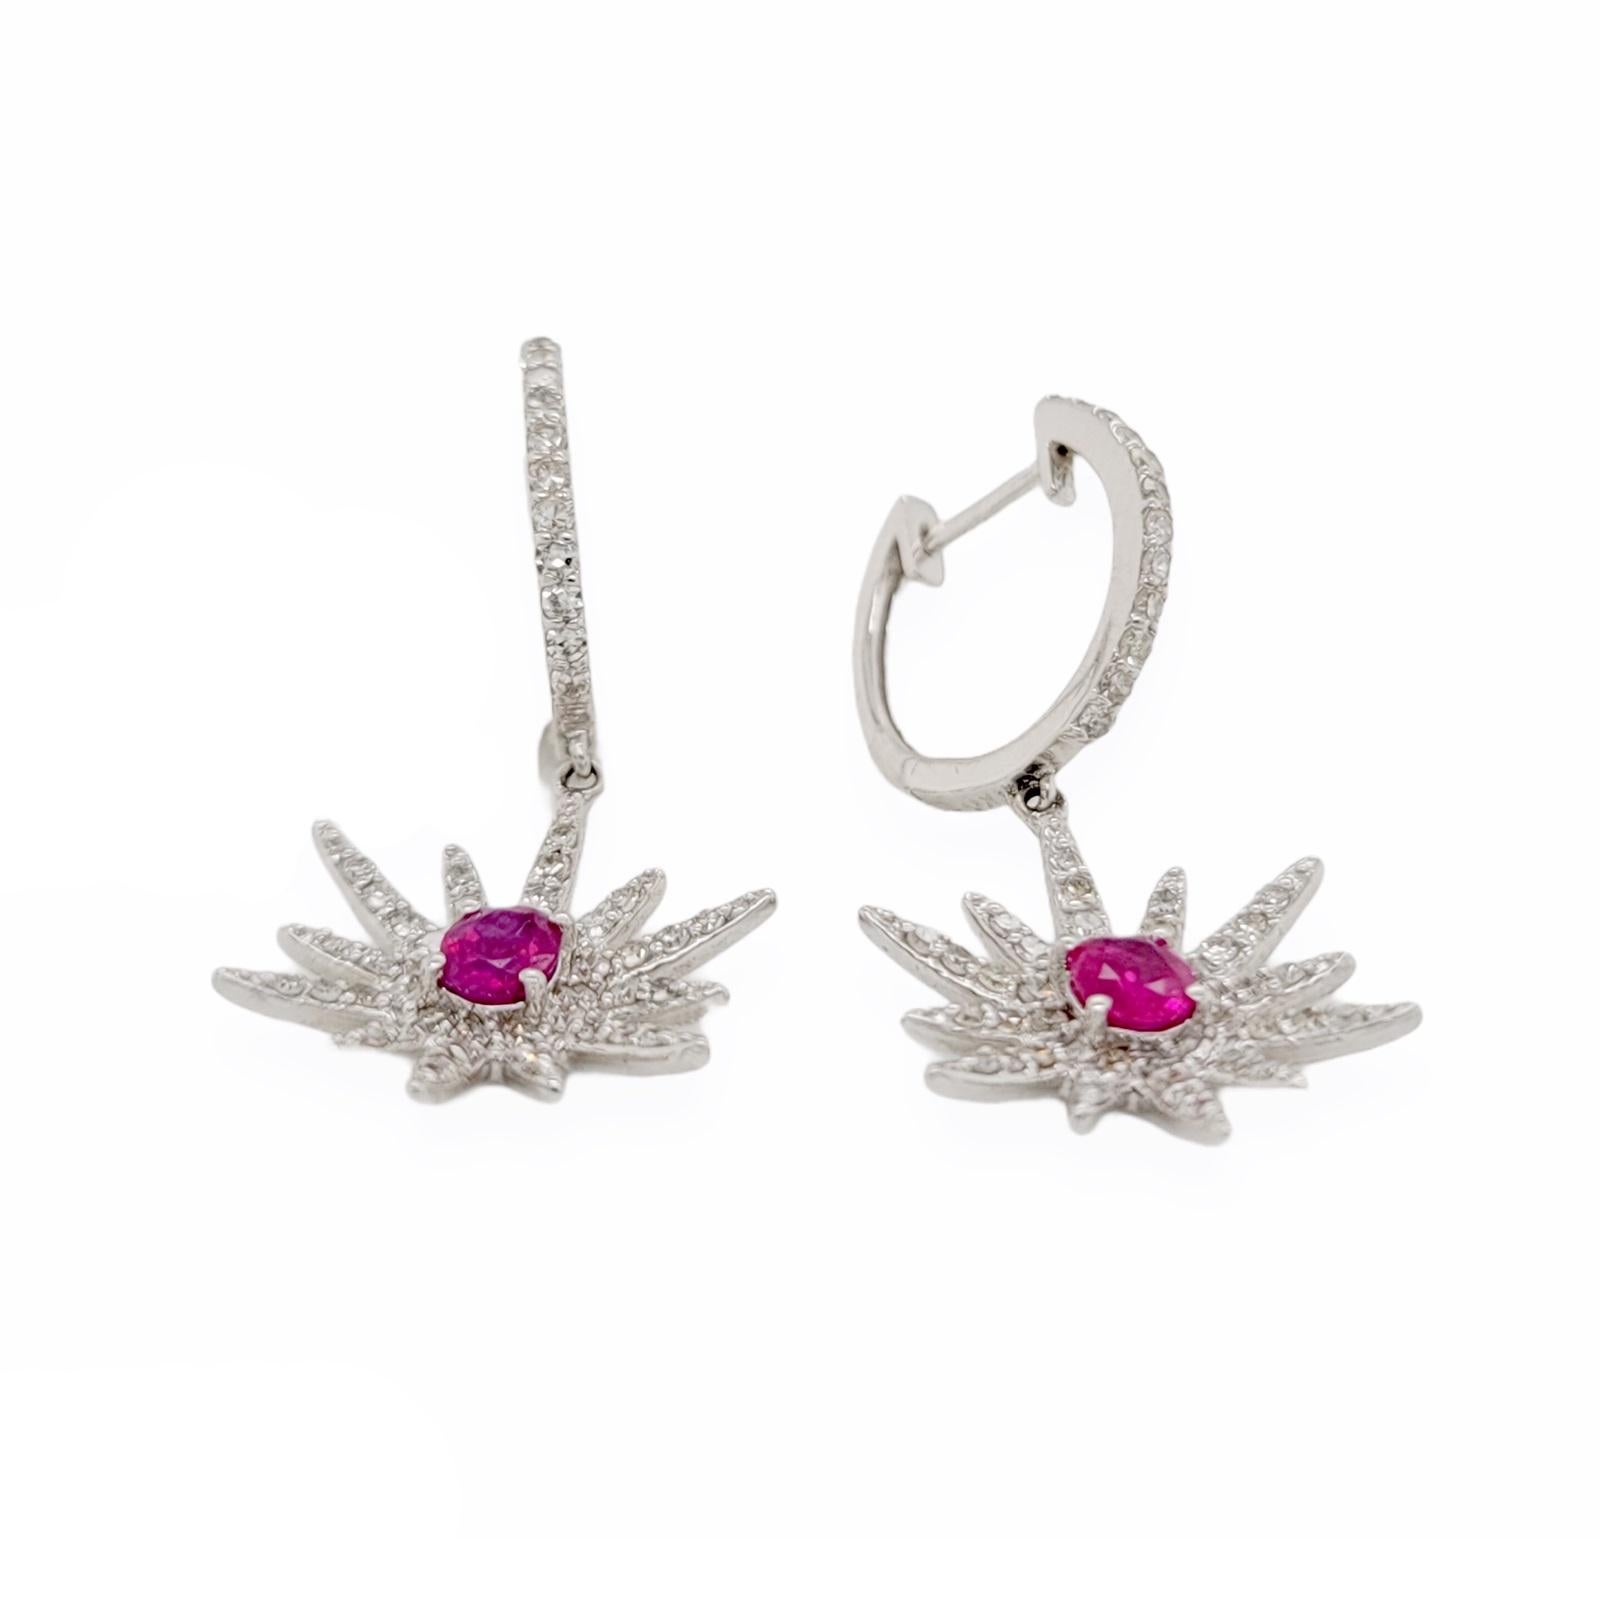 Round Cut 1.60 CT Natural Ruby & 0.45 CT Diamonds in 18K White Gold Flower Earrings For Sale